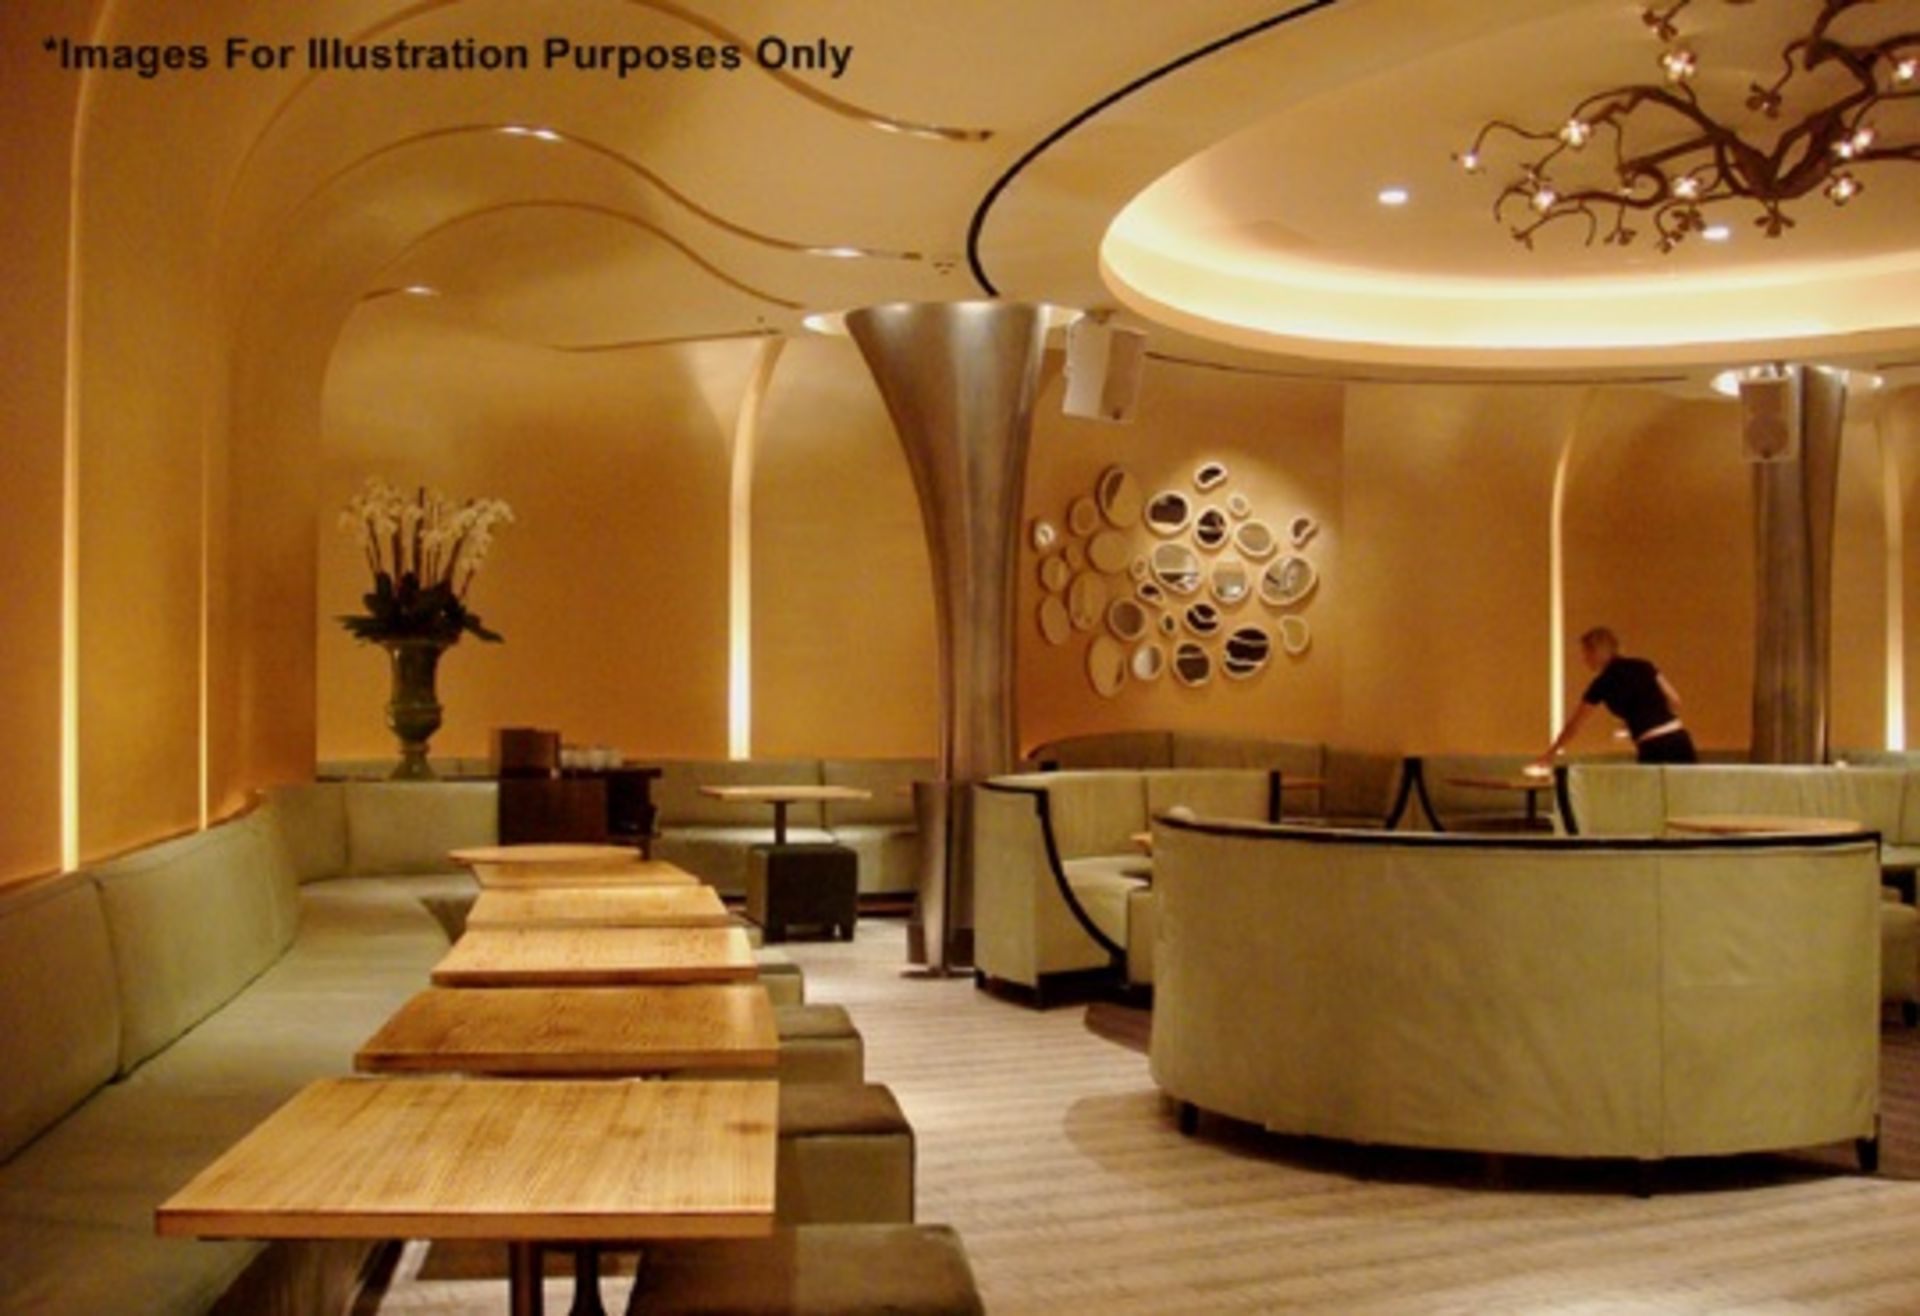 1 x Luxury Upholstered Curved Seating Area - Recently Removed From Nobu - Dimensions: W285 x D62cm x - Image 14 of 17